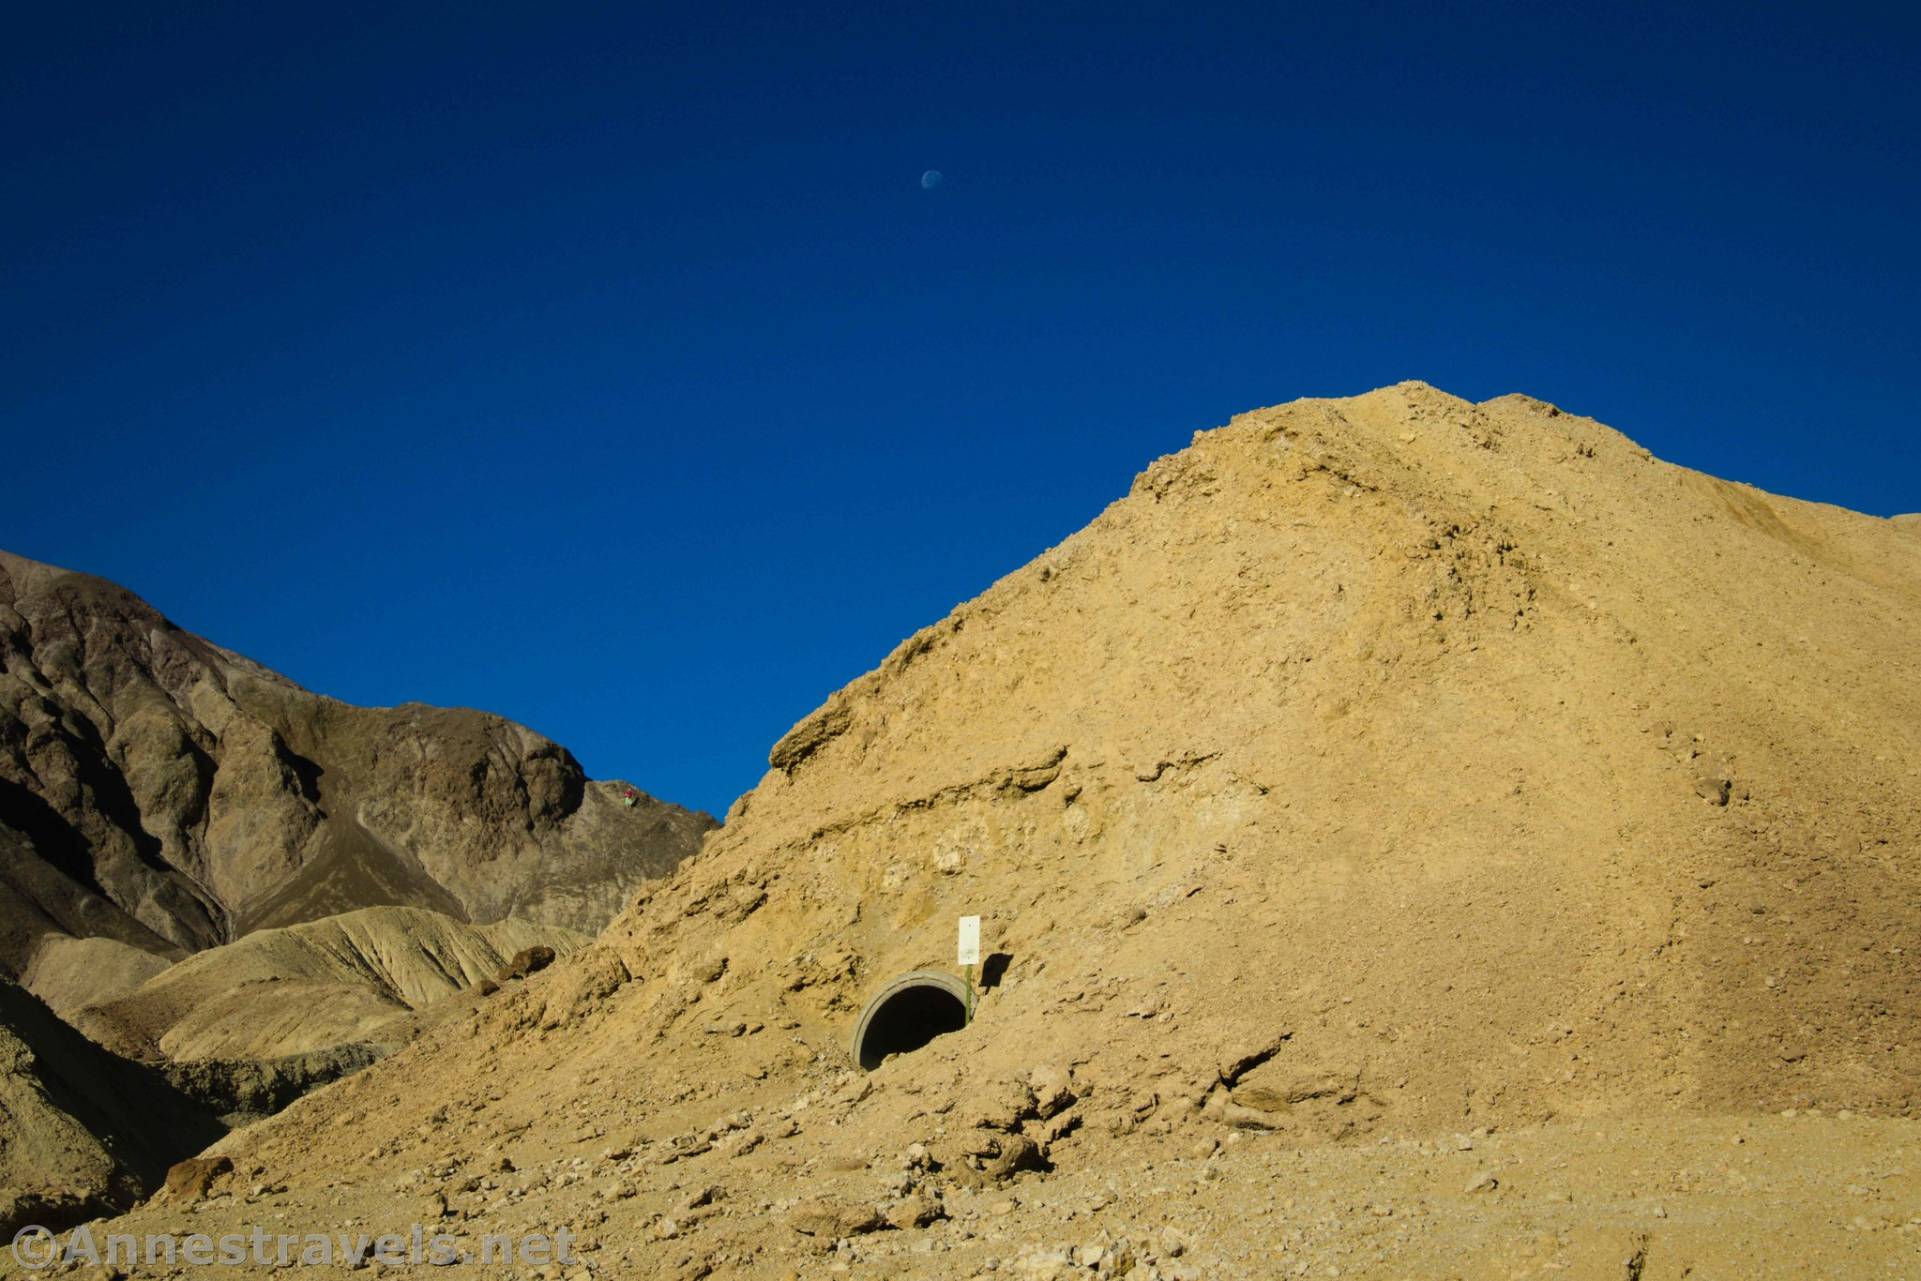 An old borax mine in 20 Mule Team, Death Valley National Park, California